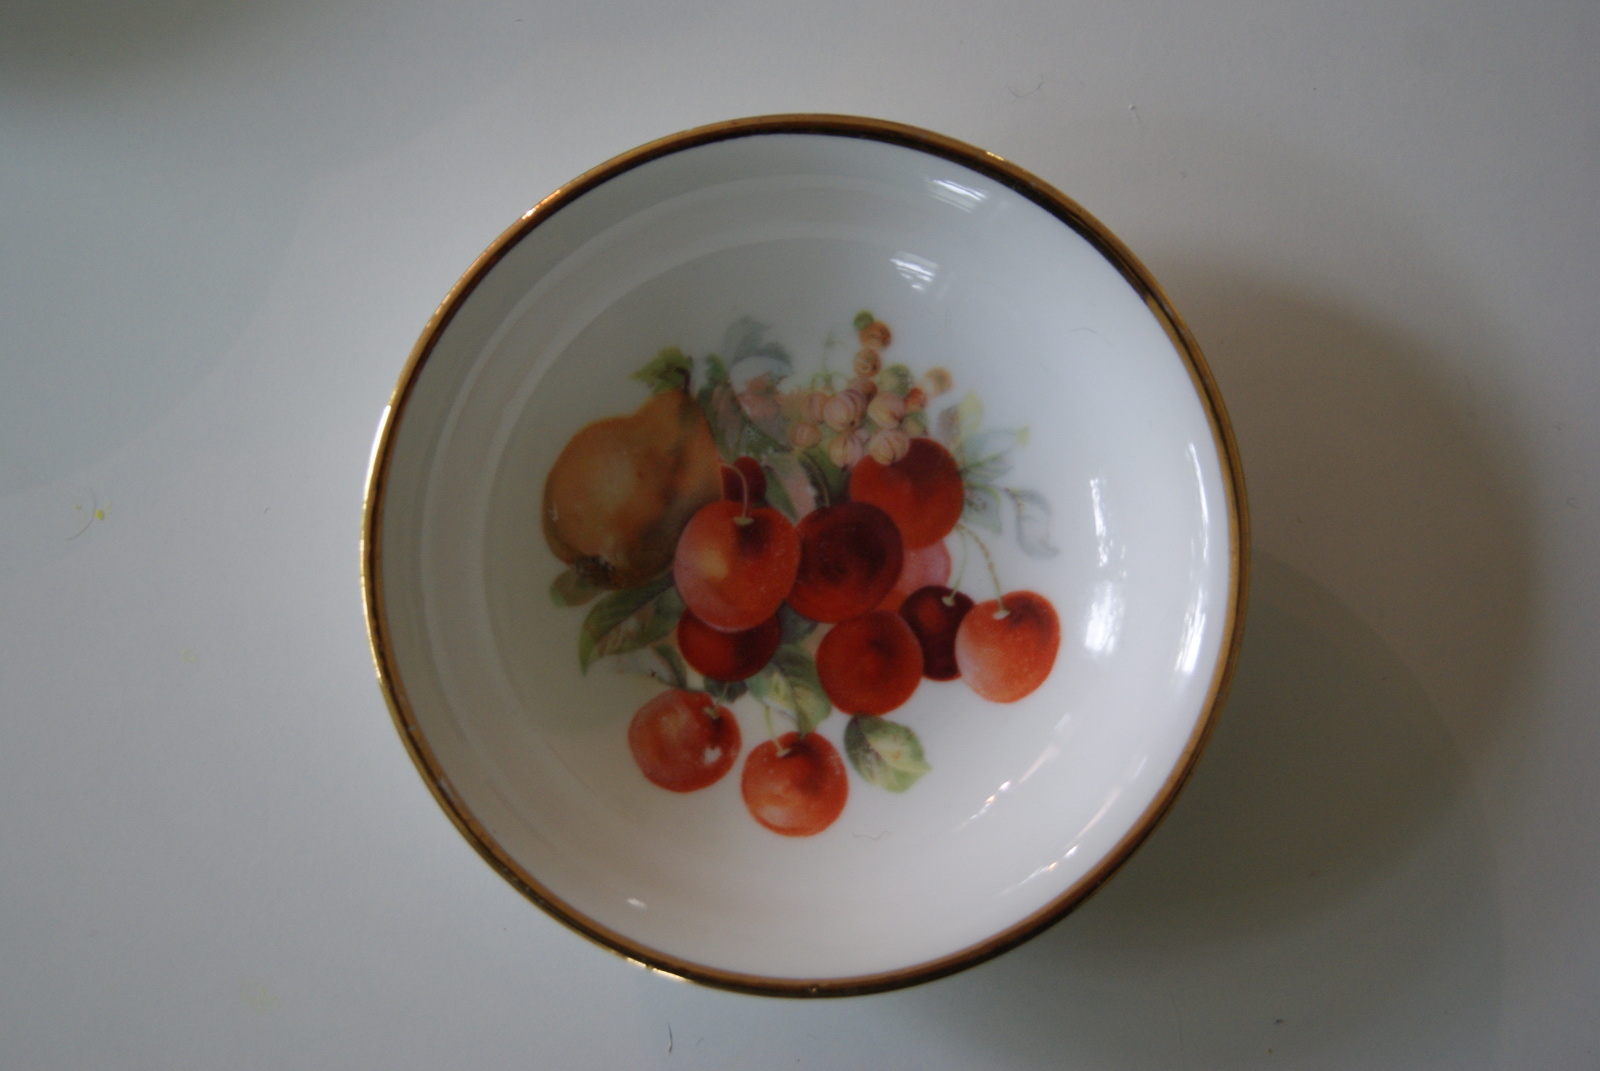 Porsgrund dessert bowl with fruits - pears, and cherries